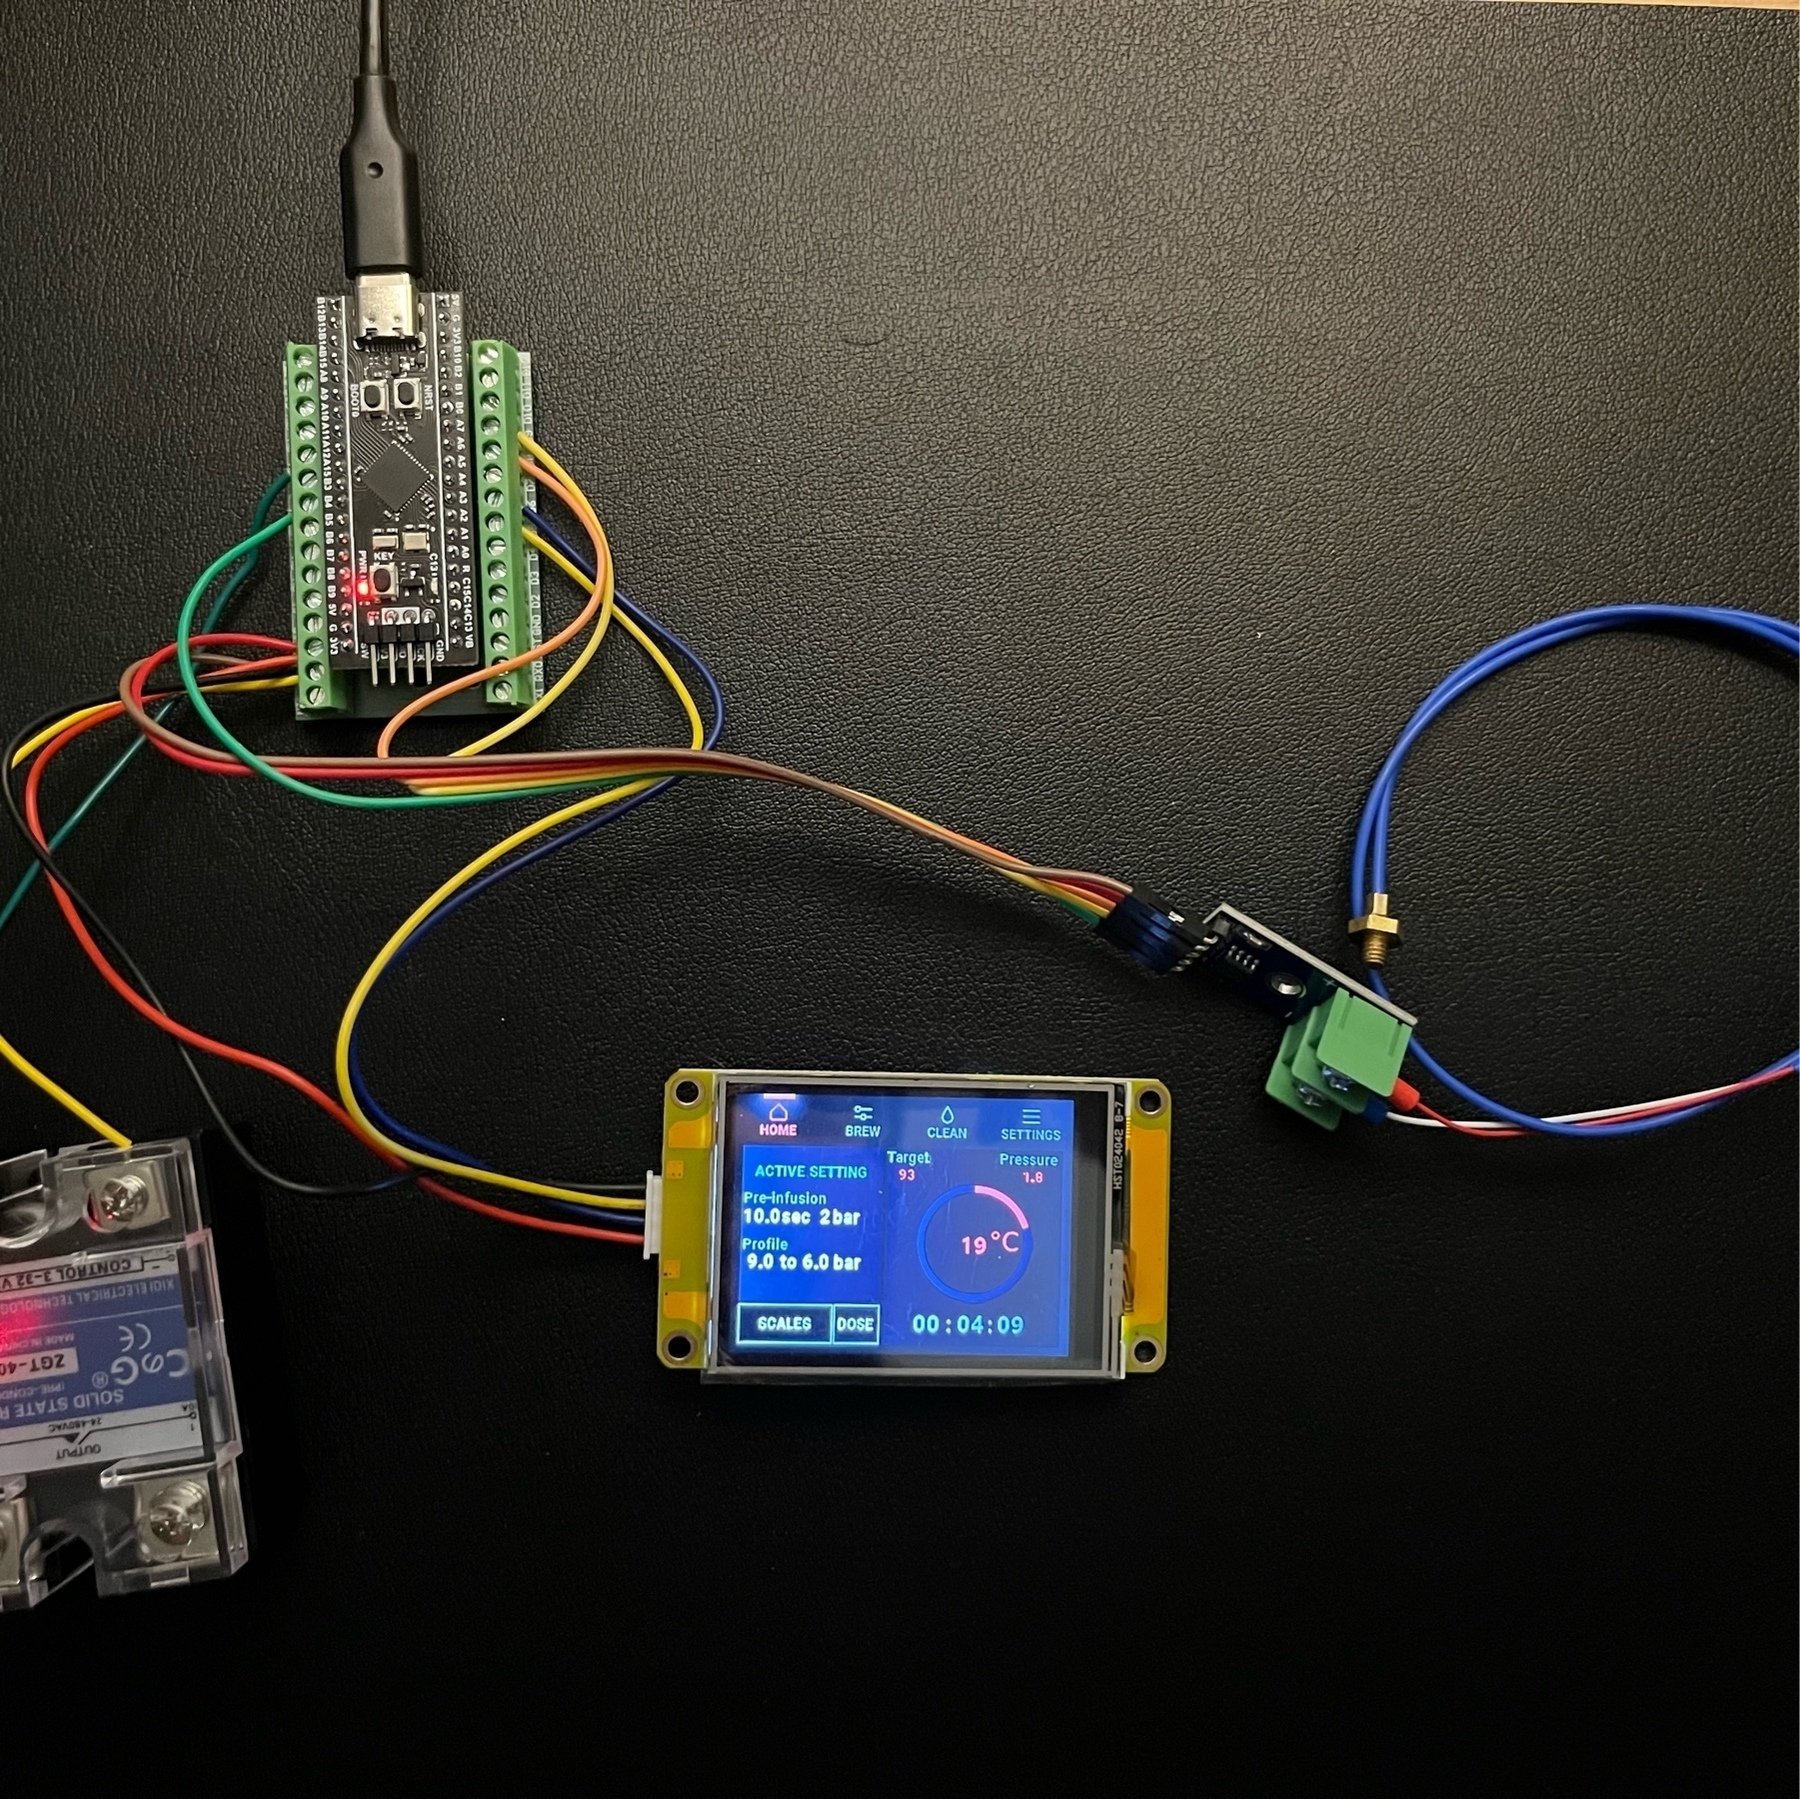 Photo of a microcontroller wired up to a relay, thermocouple, and touchscreen.